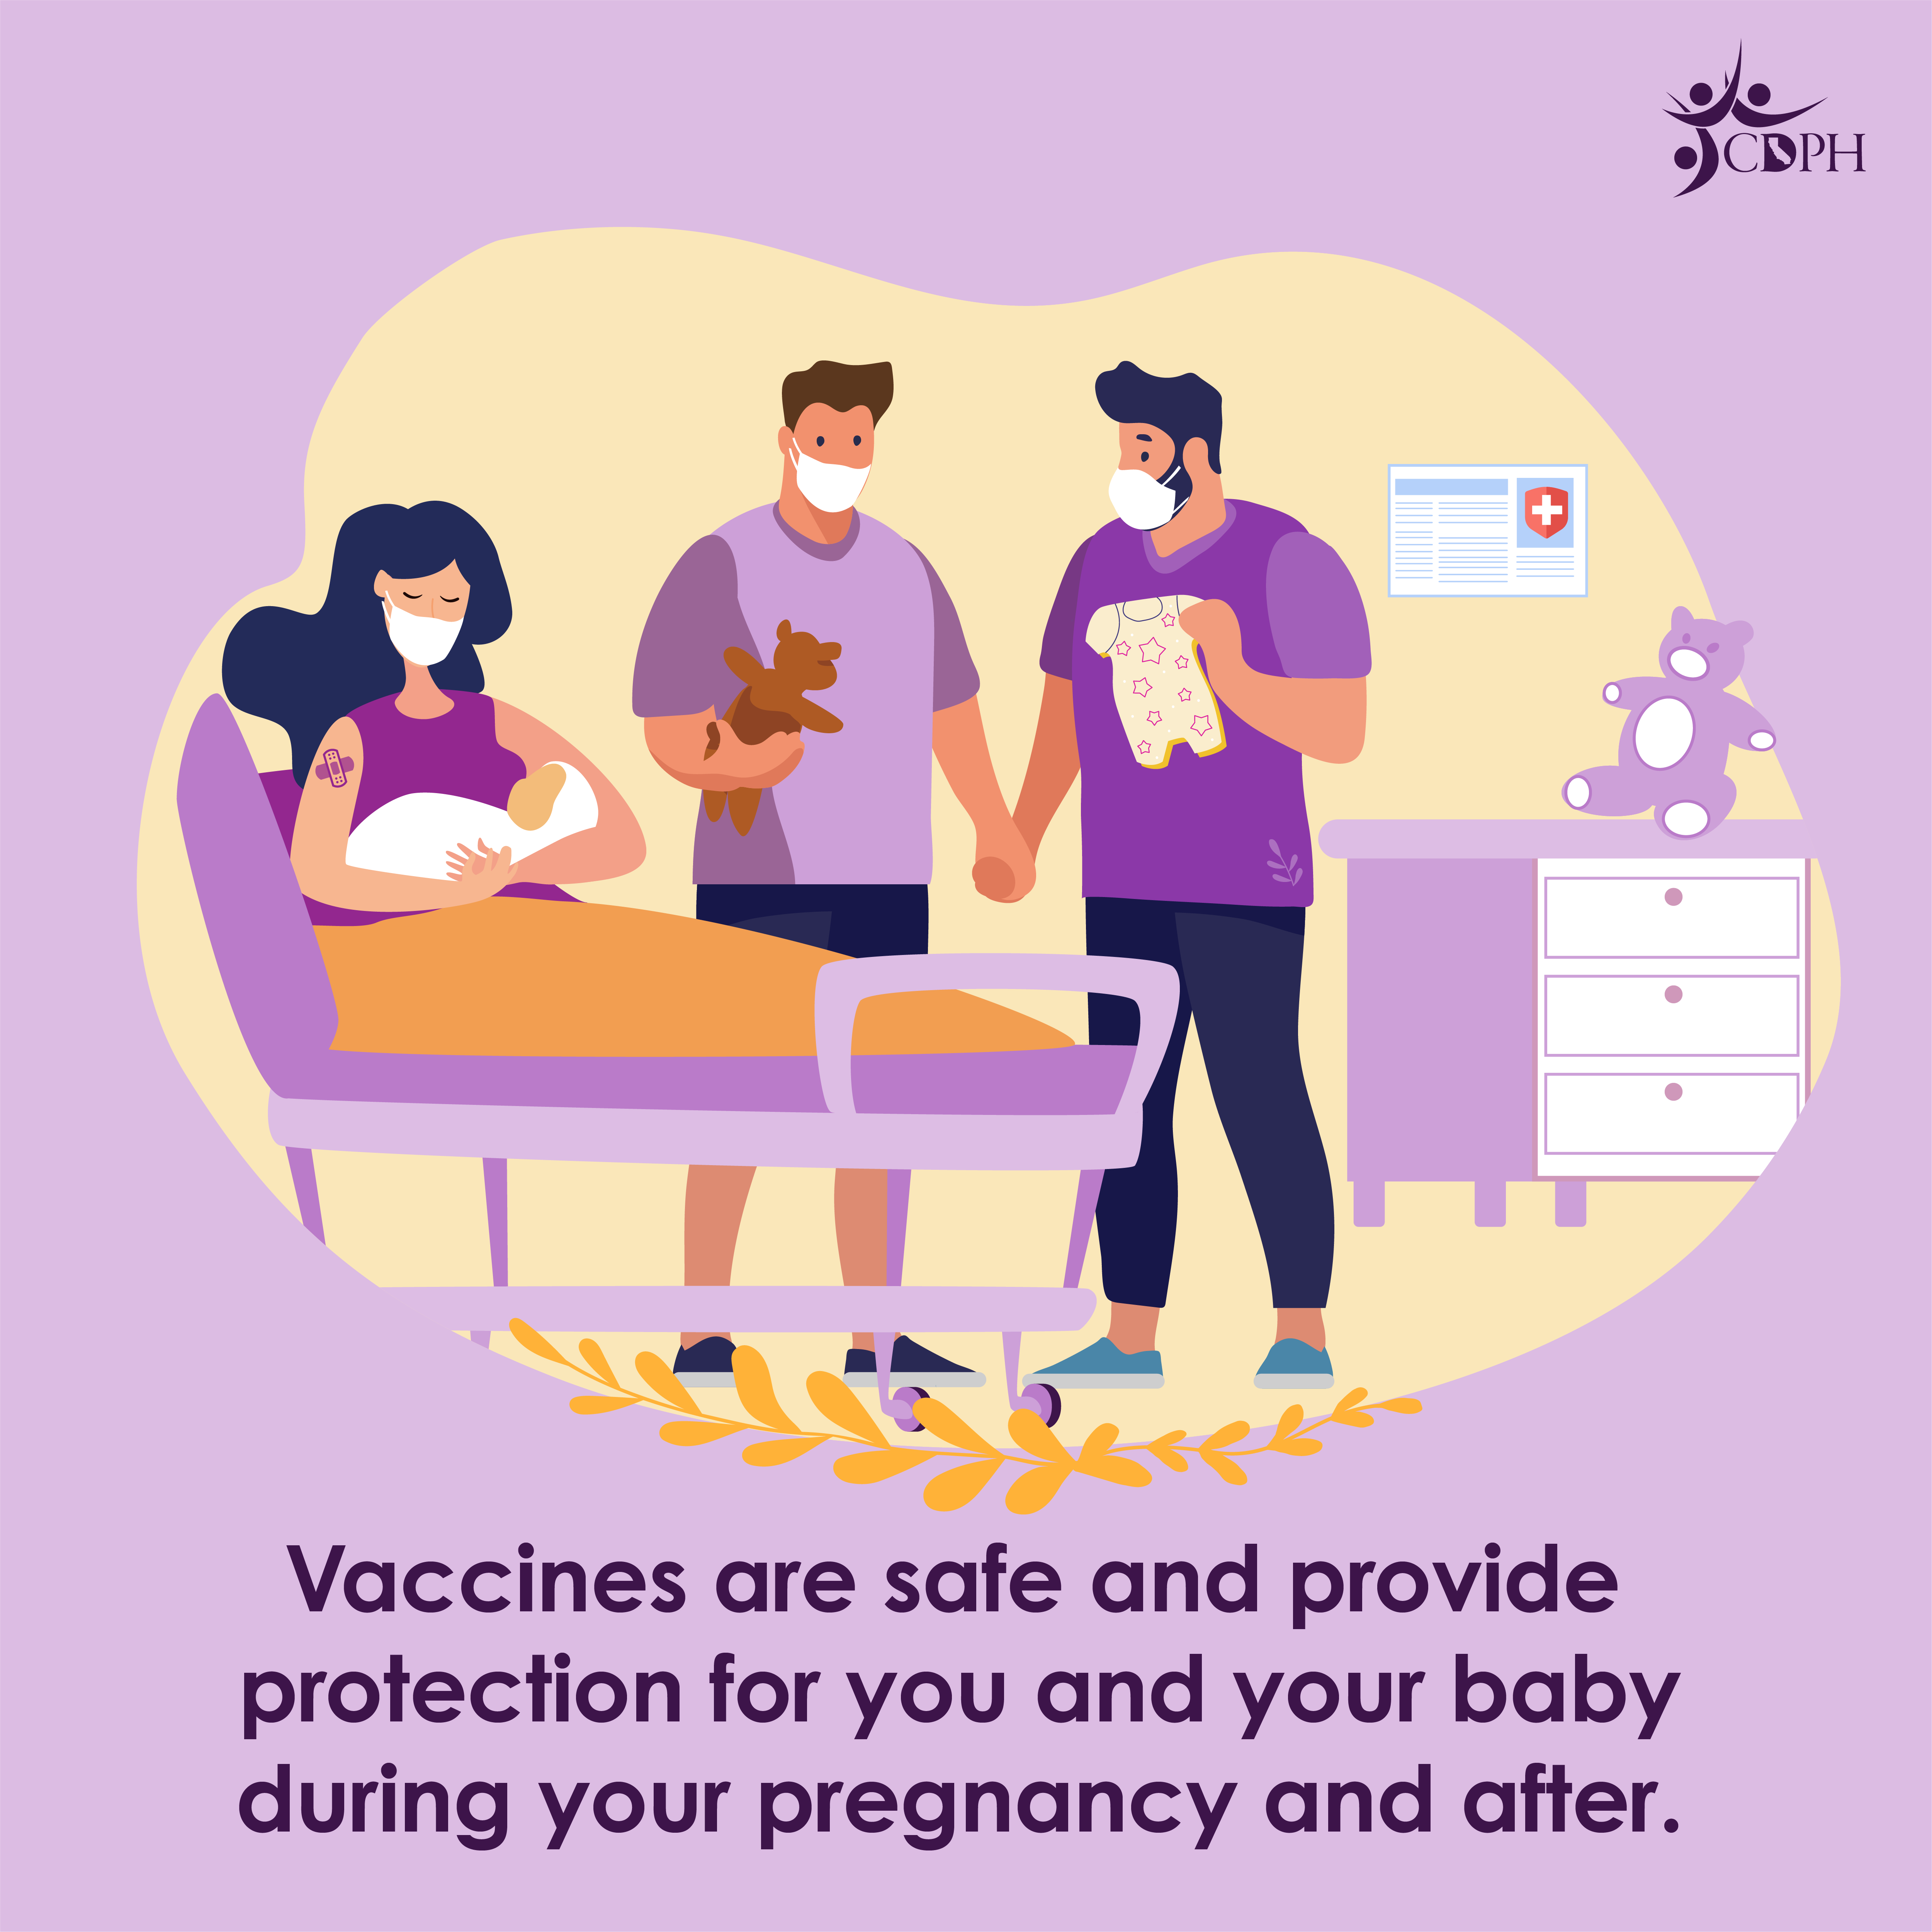 Vaccines are safe and provide protection for you and your baby during your pregnancy and after